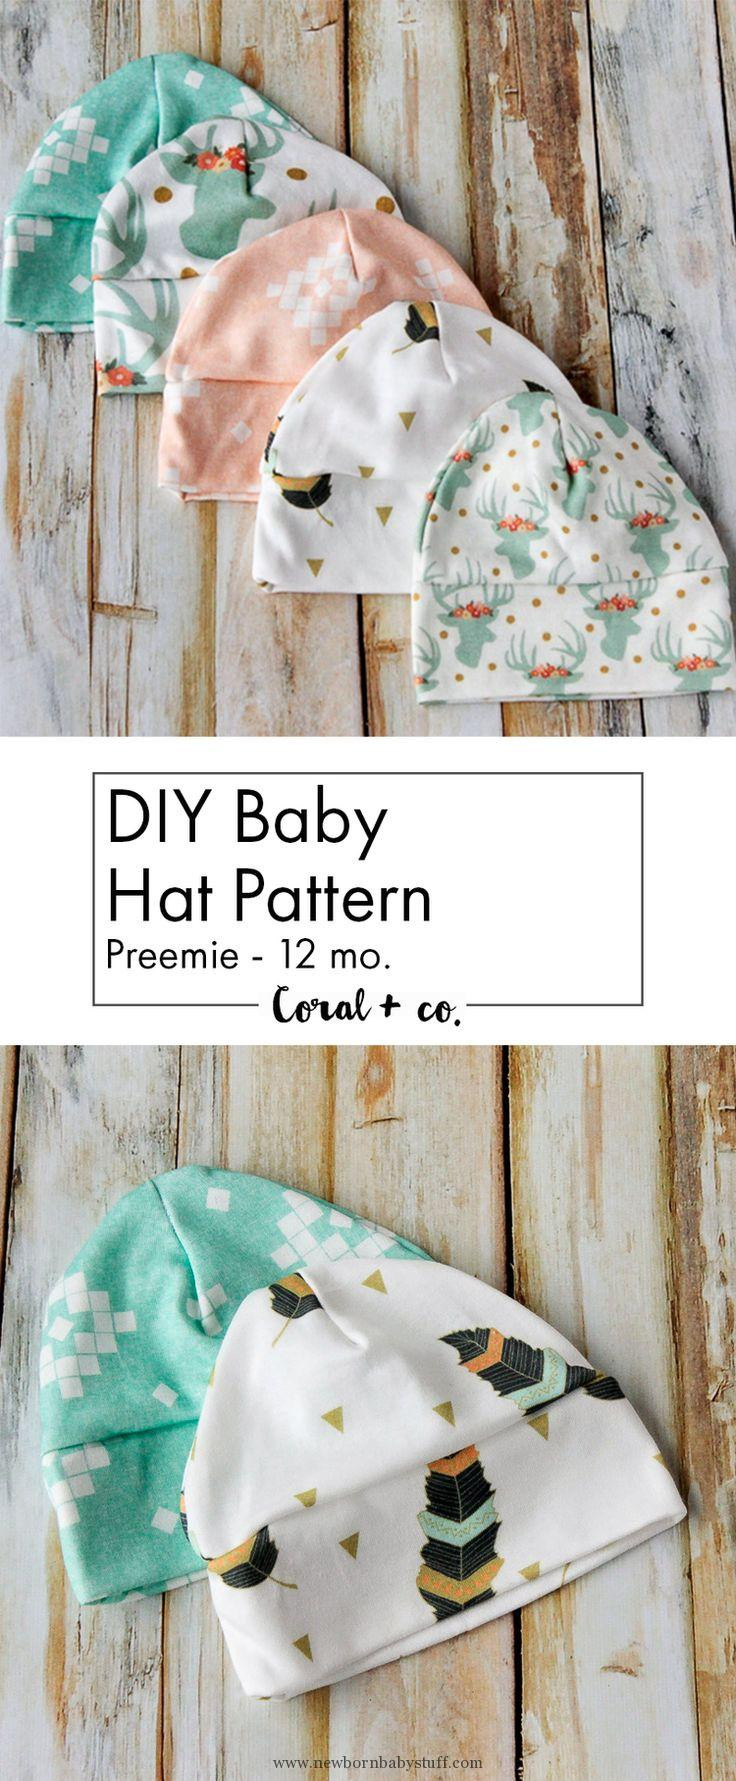 DIY Baby Hats
 Crochet Baby Hats DIY Baby Hat Sewing Pattern and Tutorial